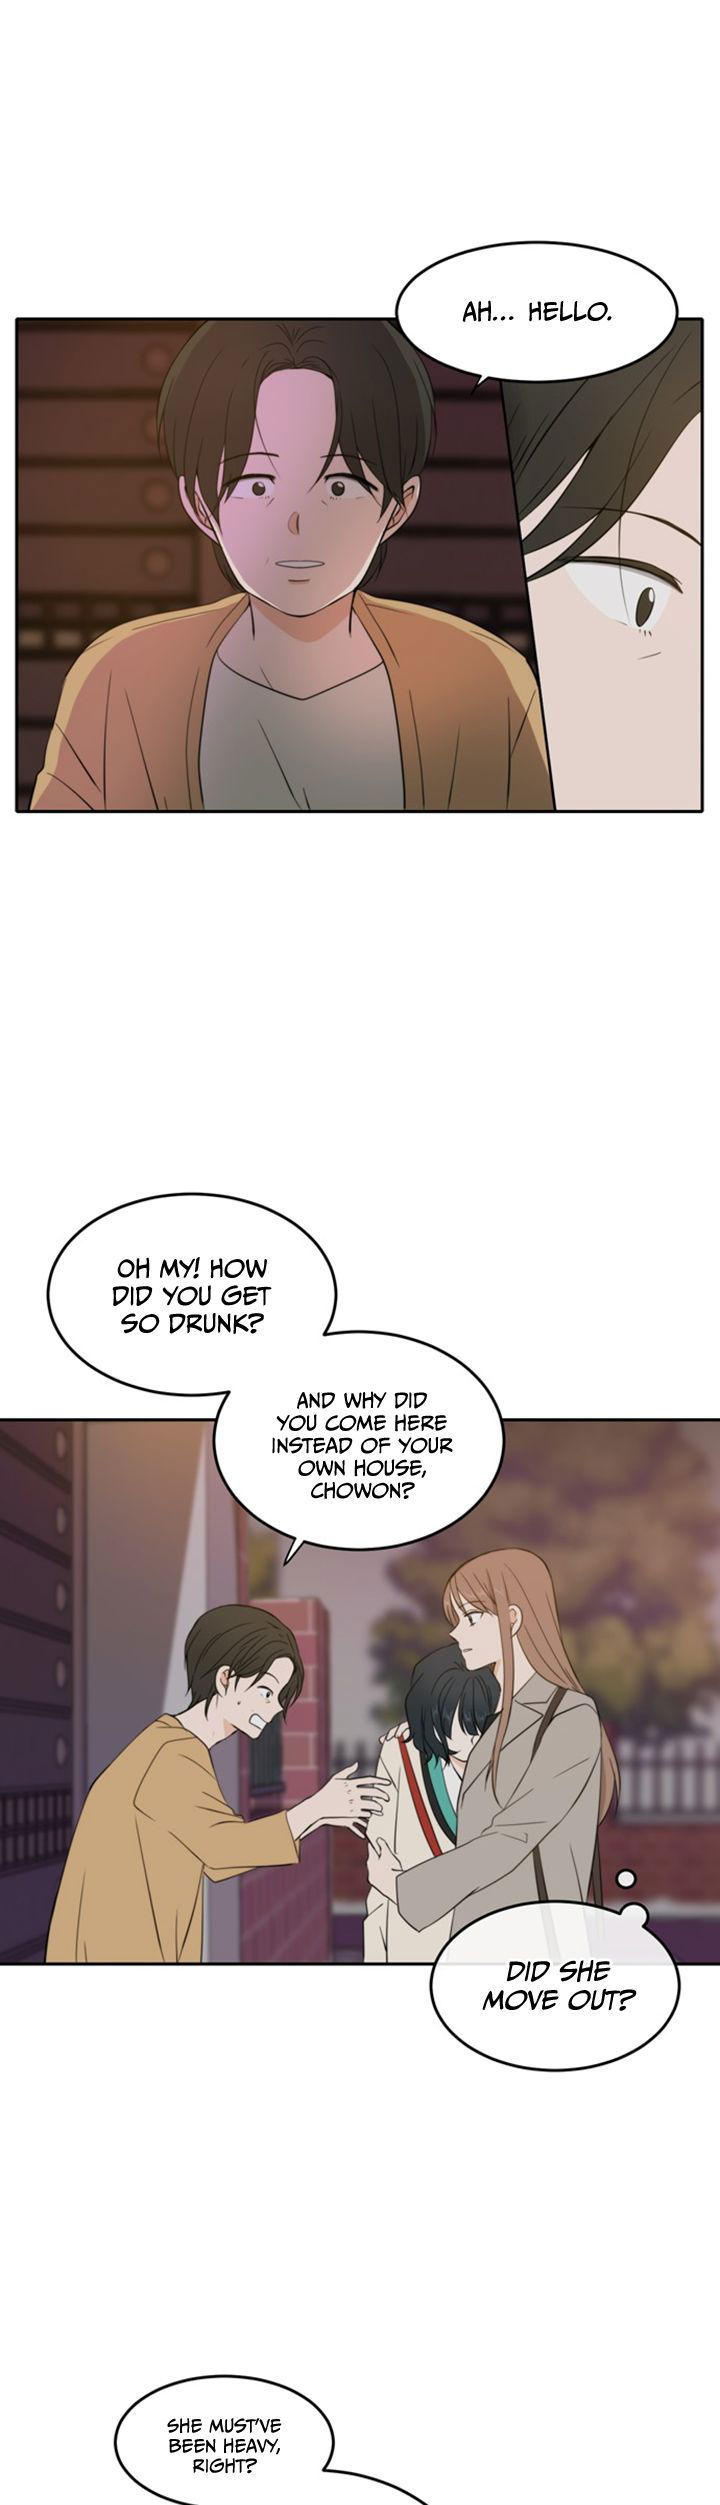 Please Take Care of Me in This Life as Well Chapter 18 page 2